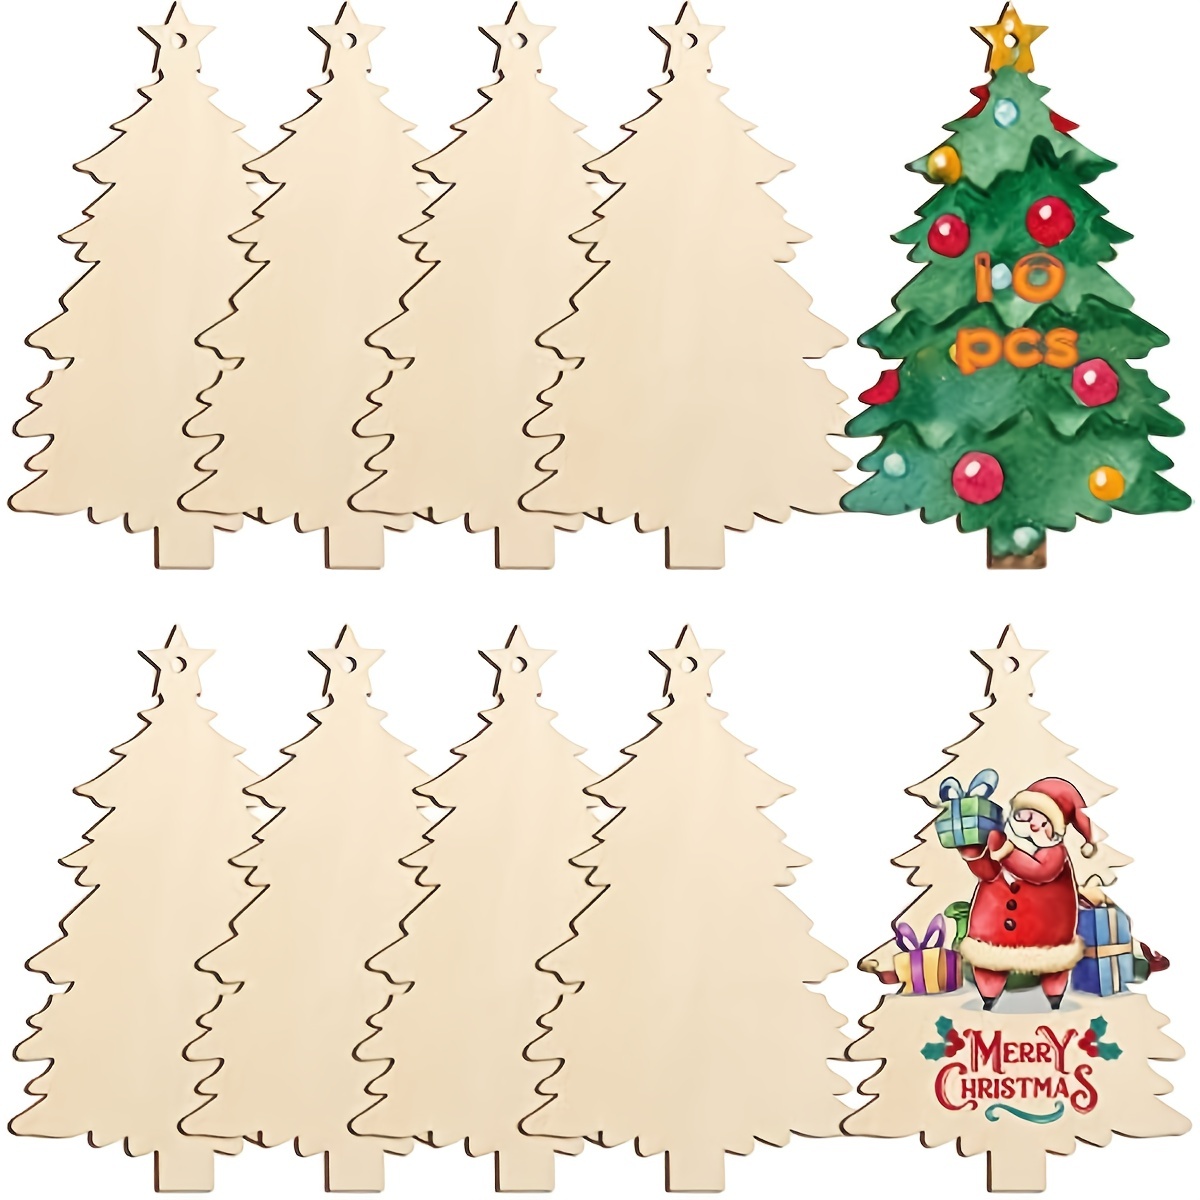  166pcs Wooden Christmas Ornaments Unfinished, Wooden  Ornaments To Paint For Christmas Tree Decorations Holiday Hanging  Decorations